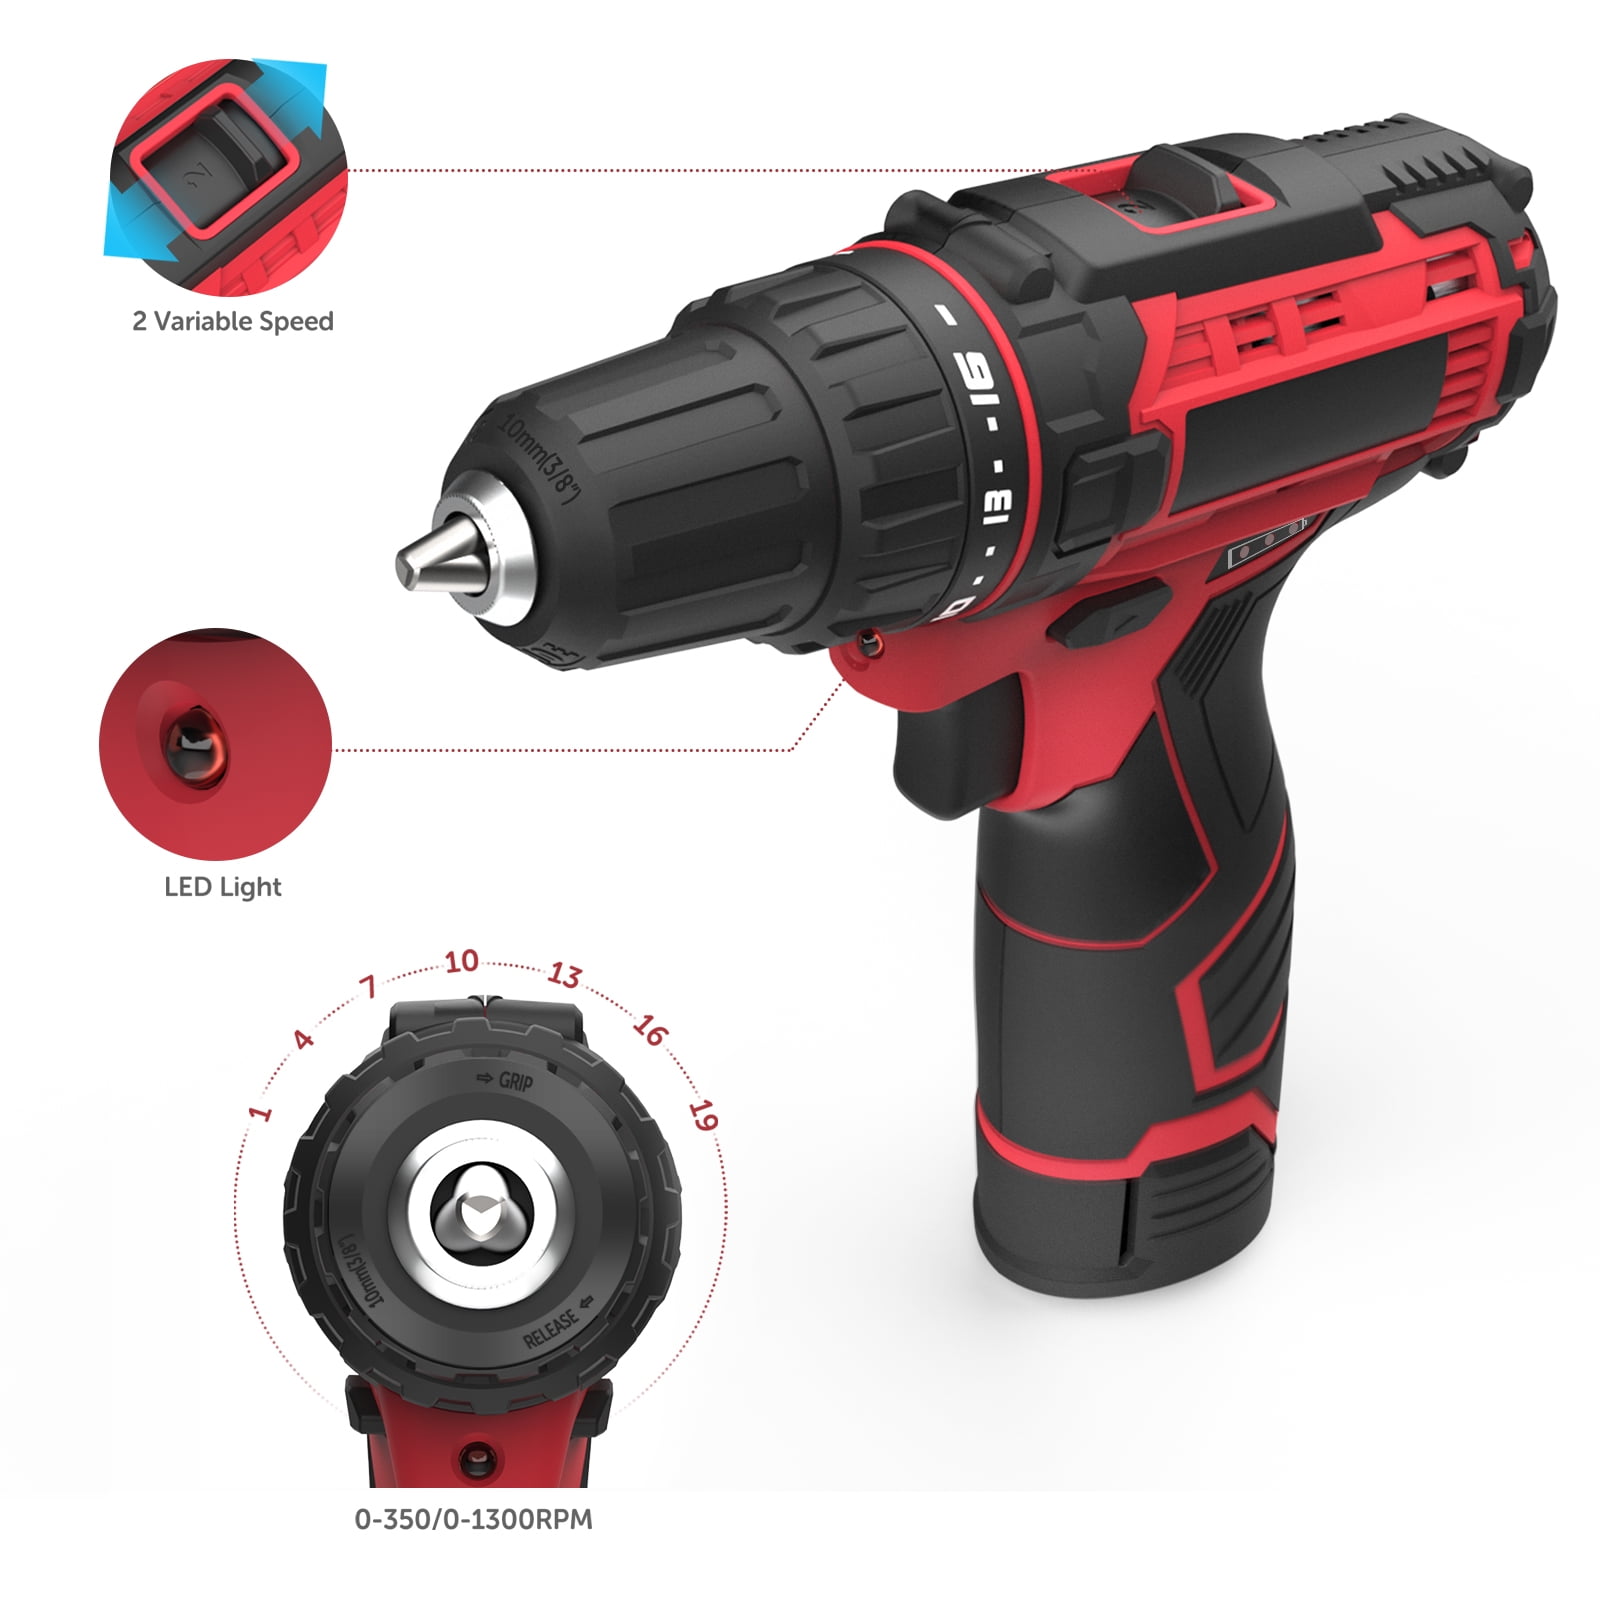 Cordless Drill Driver Kit 3/8 Keyless Chuck 18+1 Clutch 21V Impact Drill Set with 1.5Ah Li-Ion Battery & Charger 450 In-lb Torque 0-350/0-1400RMP Variable Speed Drilling Wall Brick Wood Metal 